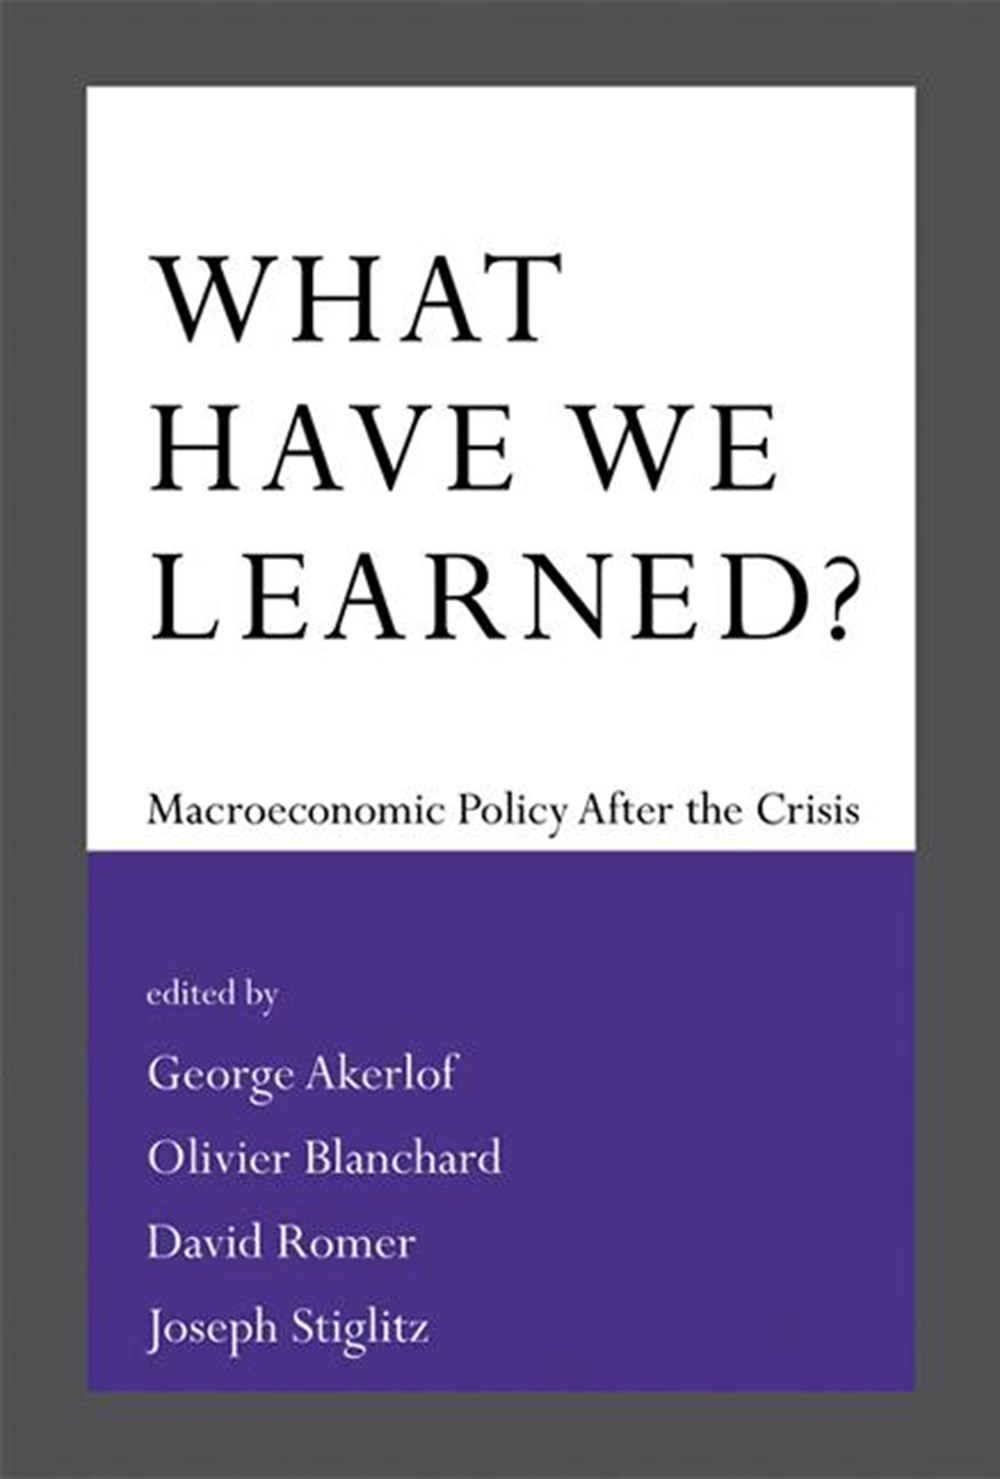 What Have We Learned? Macroeconomic Policy After the Crisis